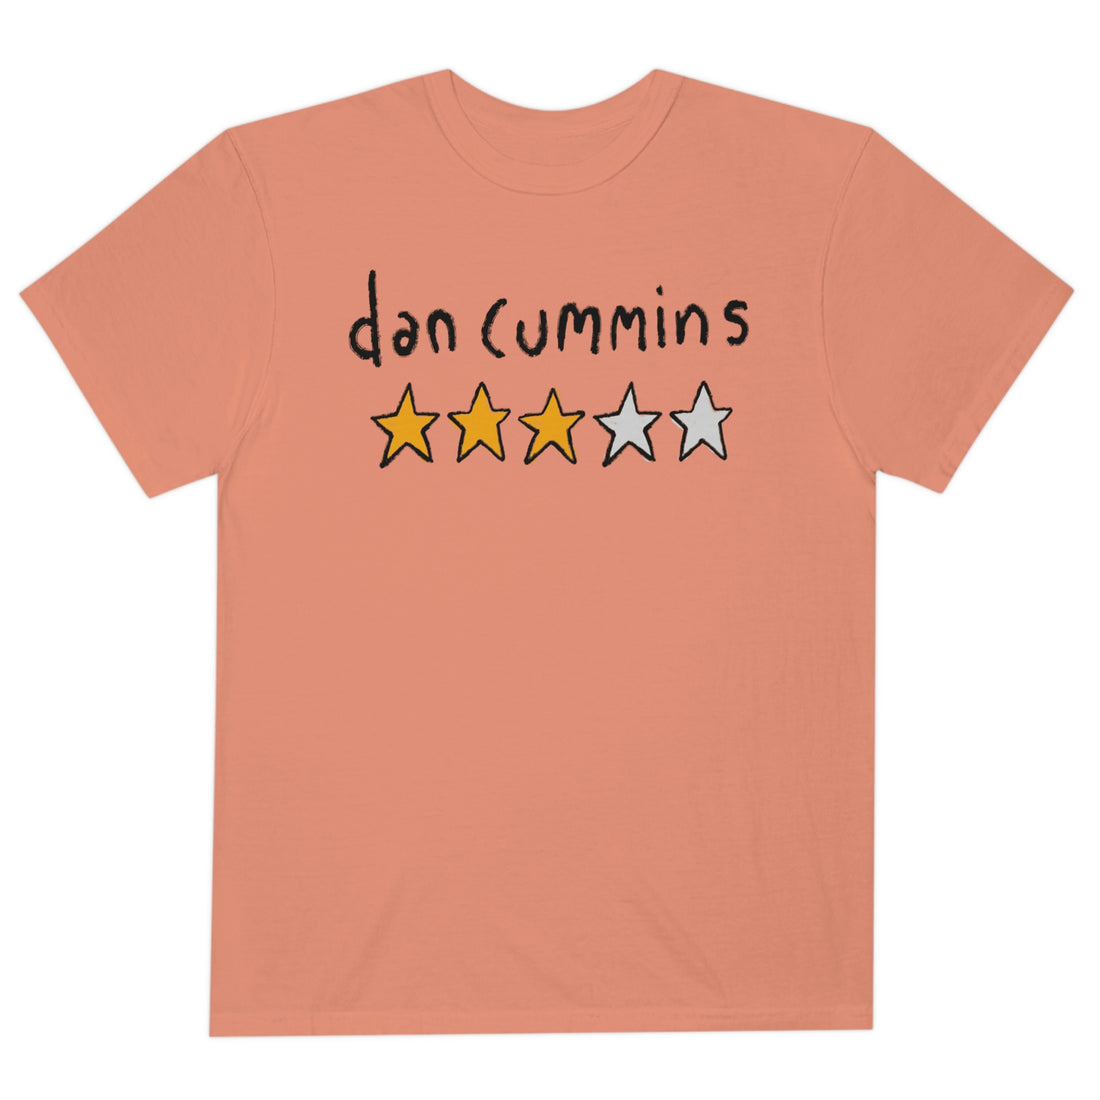 3 out of 5 Stars Tee